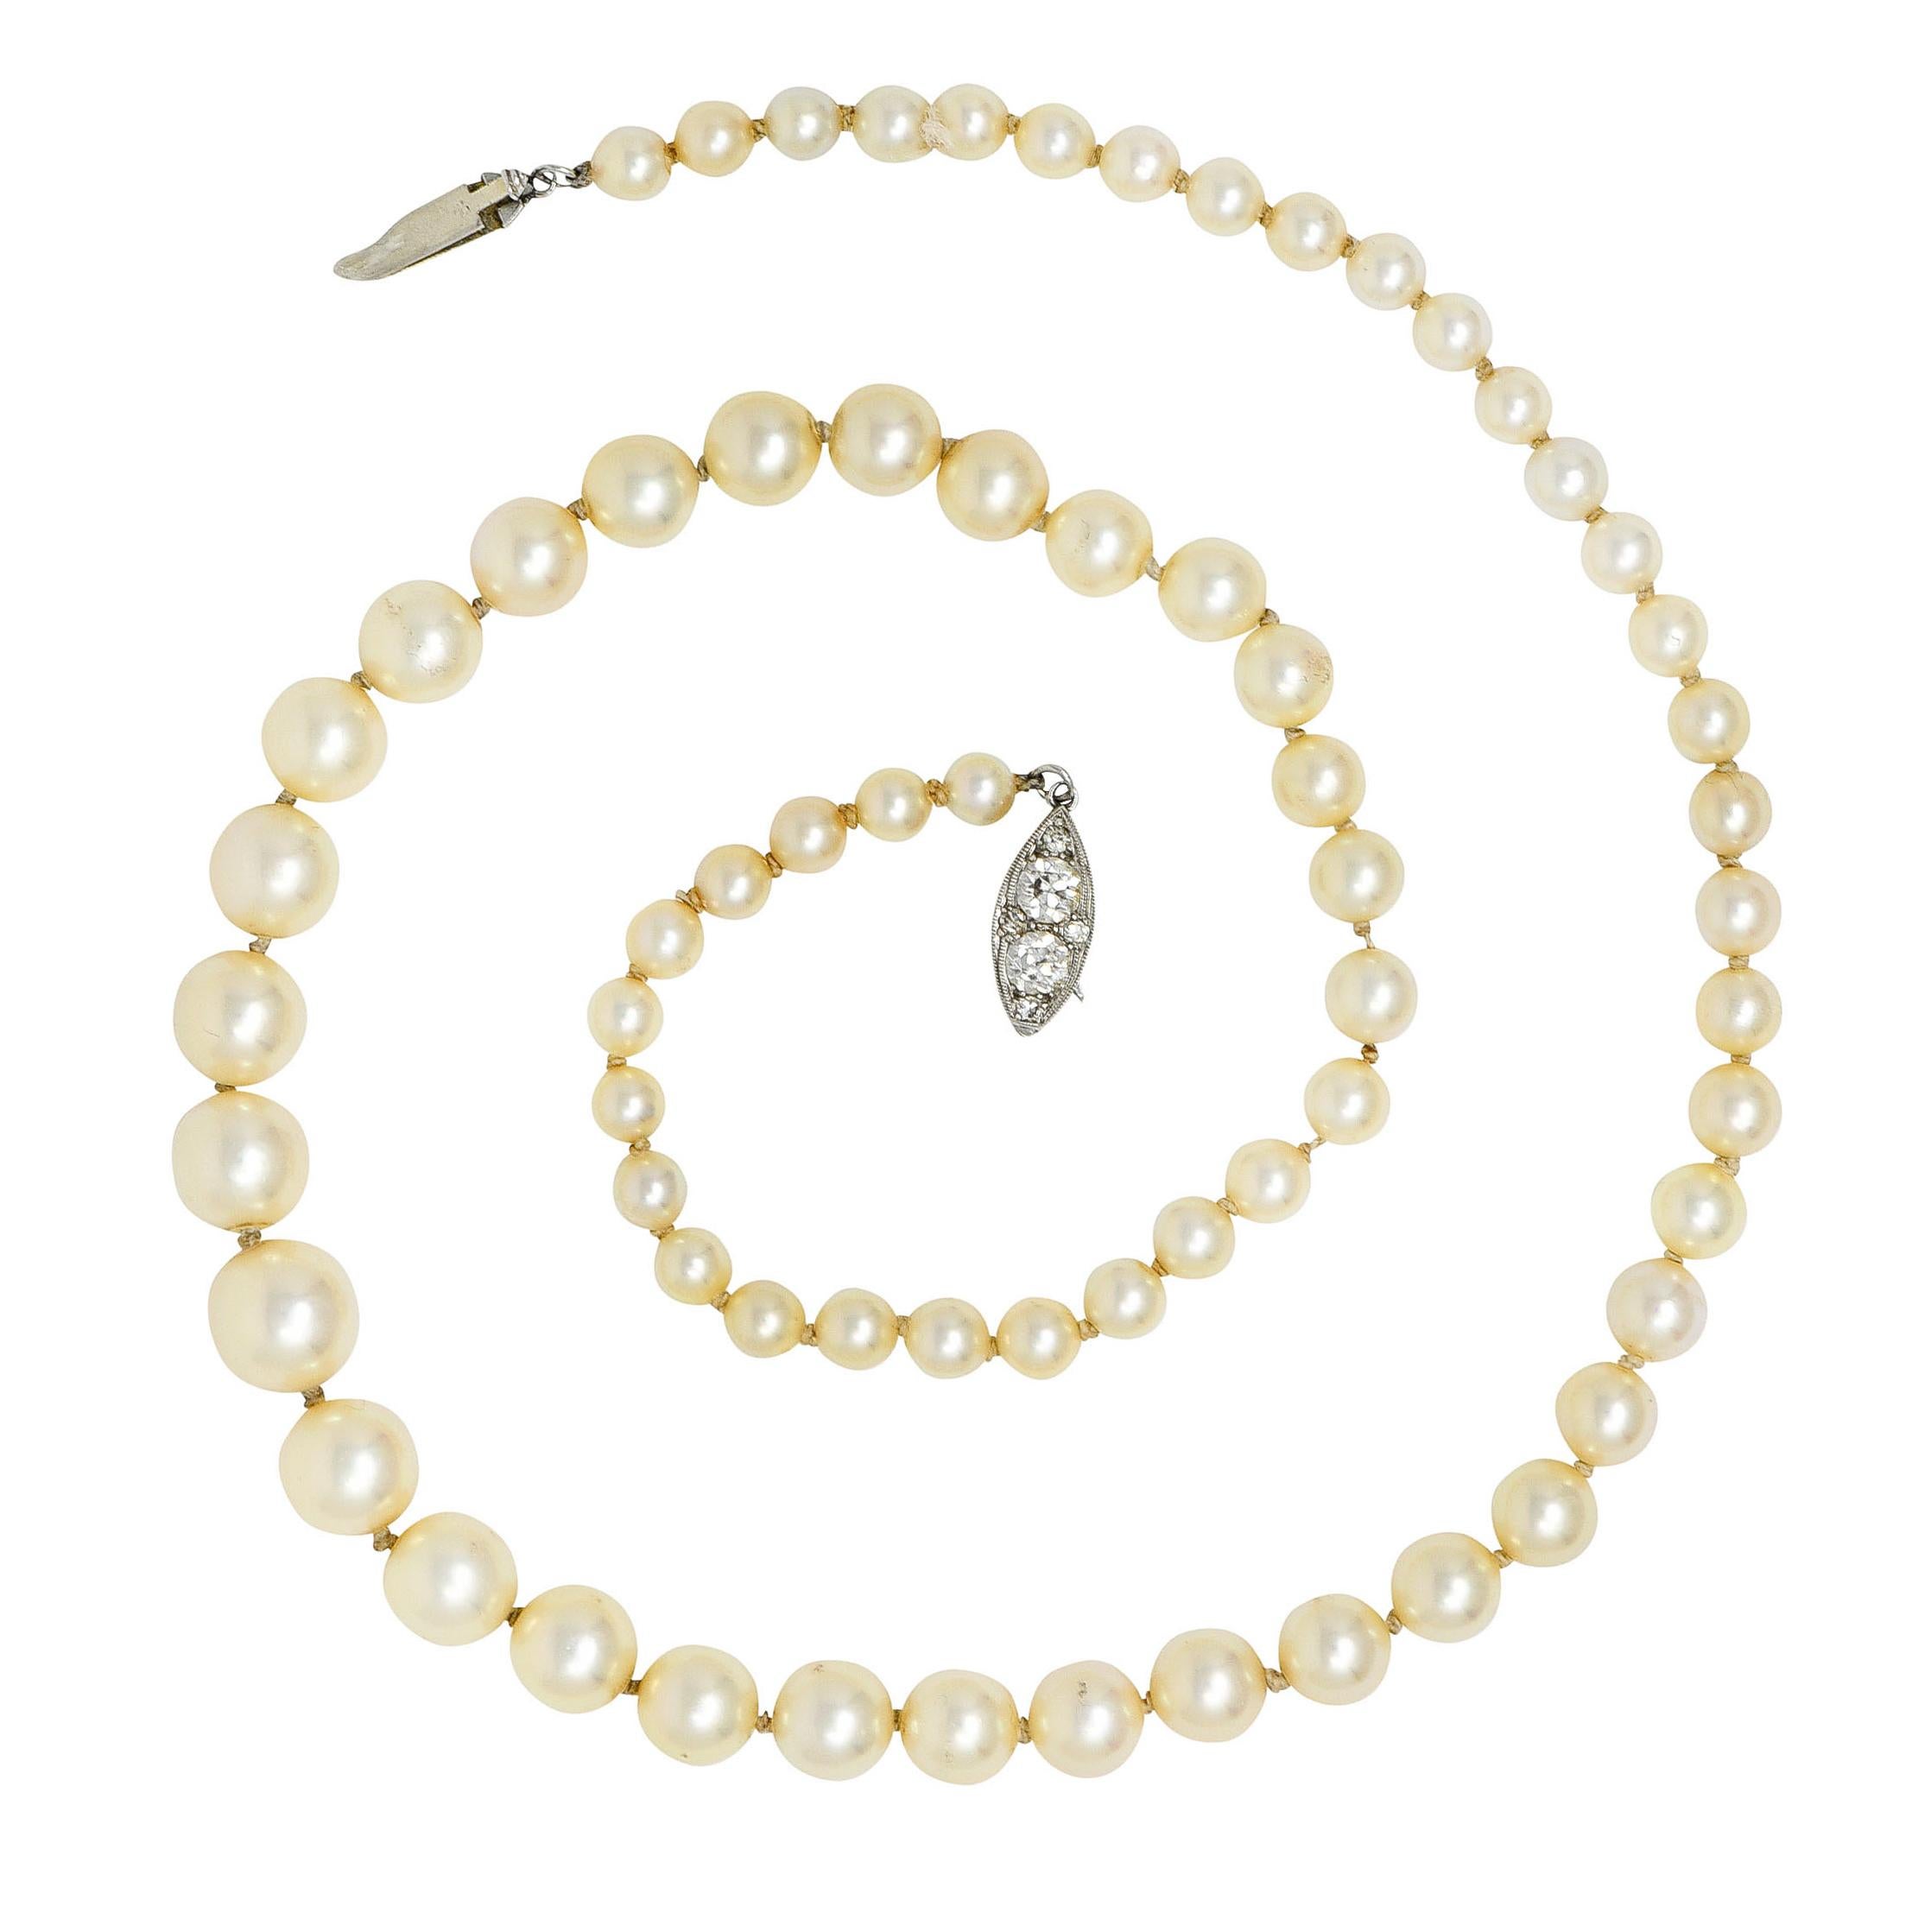 Strand necklace is comprised of hand-knotted pearls - very well matched

Graduating in size from 4.0 mm to 8.3 mm - very well matched

Cream in color with some rosè overtones and overall very good to excellent luster

Completed by a navette shaped